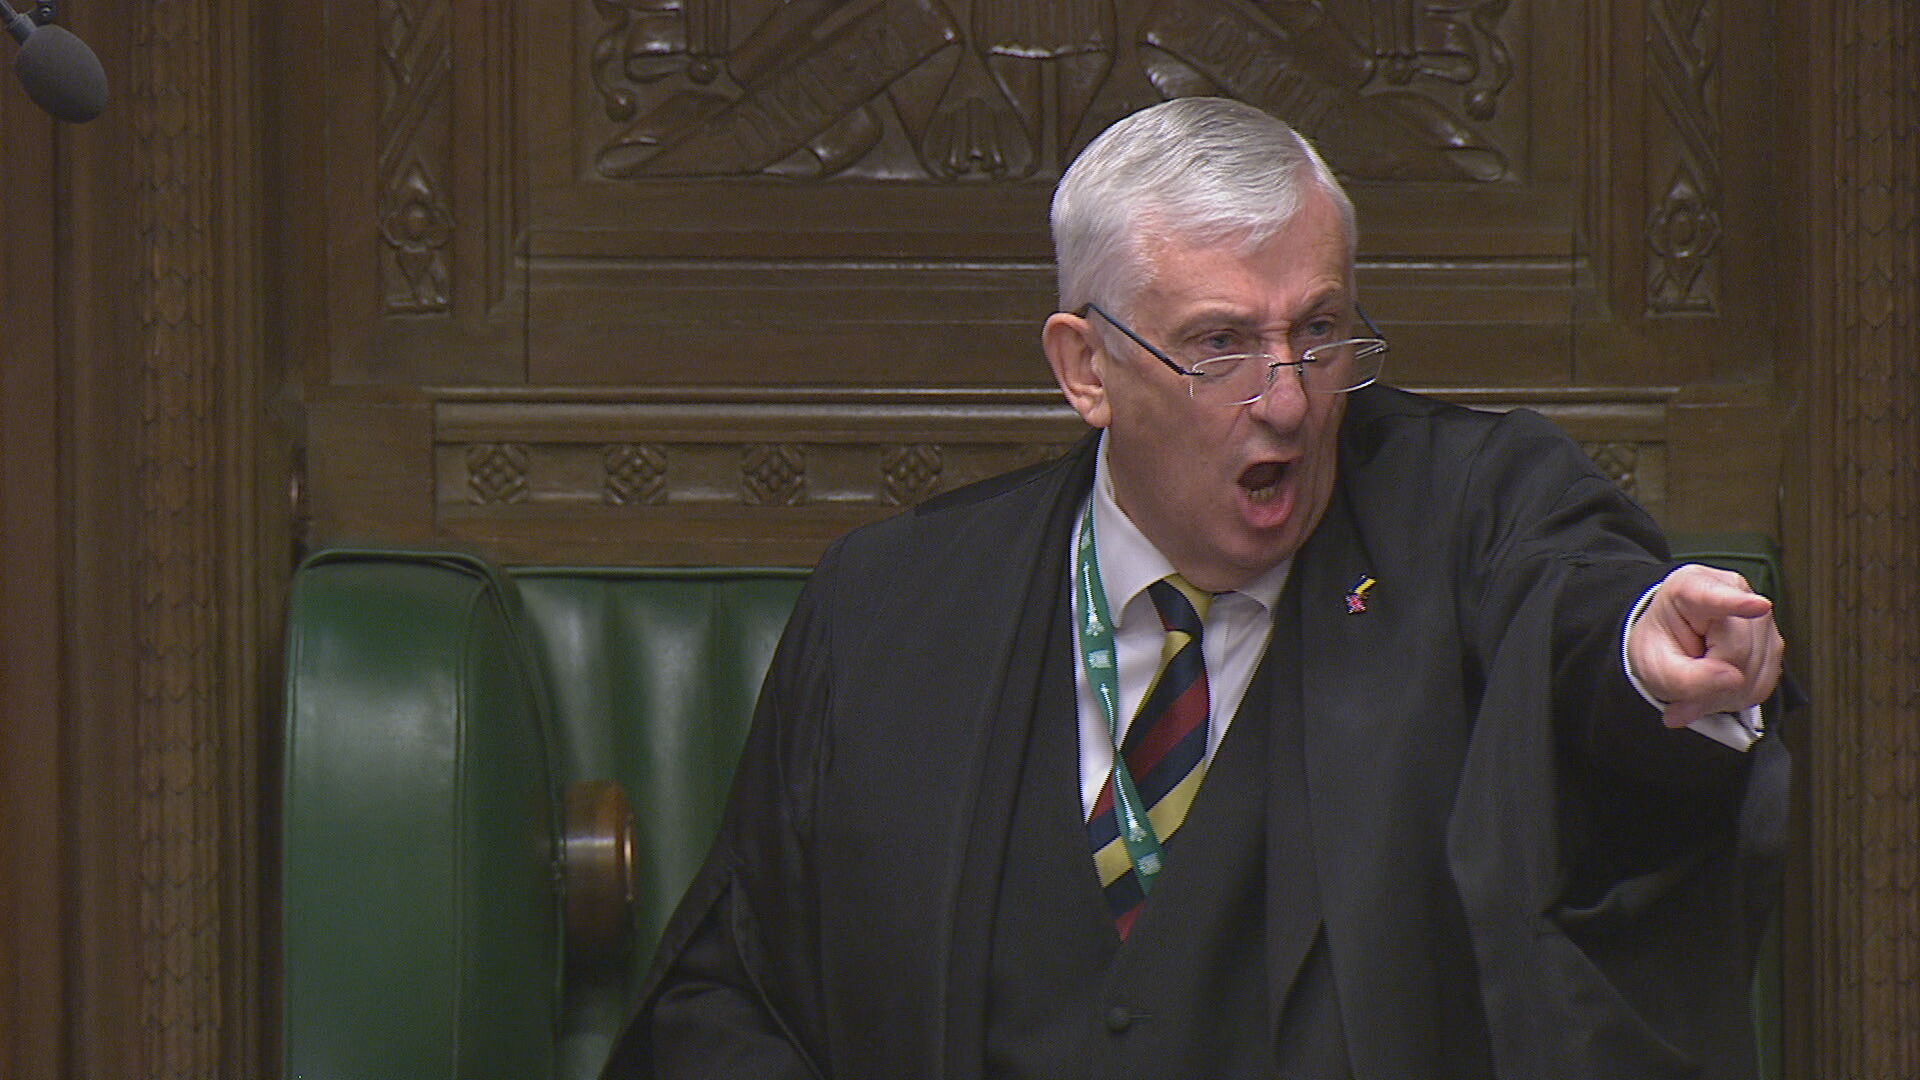 Hoyle repeatedly asked MacAskill and Hanvey to sit down before ordering their removal from the chamber.